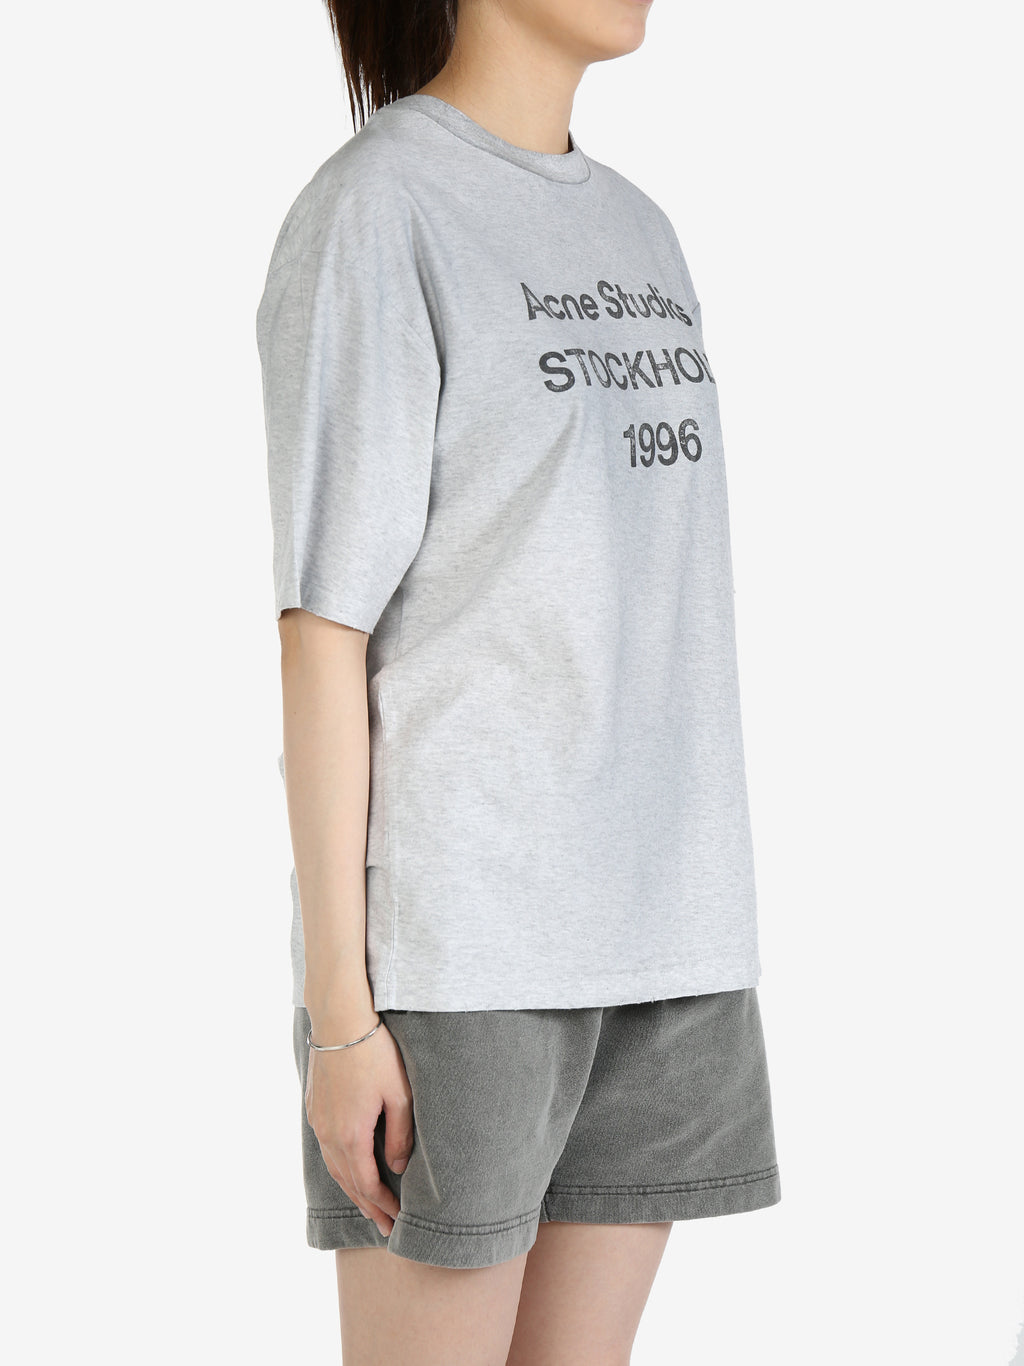 ACNE STUDIOS Unisex Relaxed Fit Logo T-Shirt